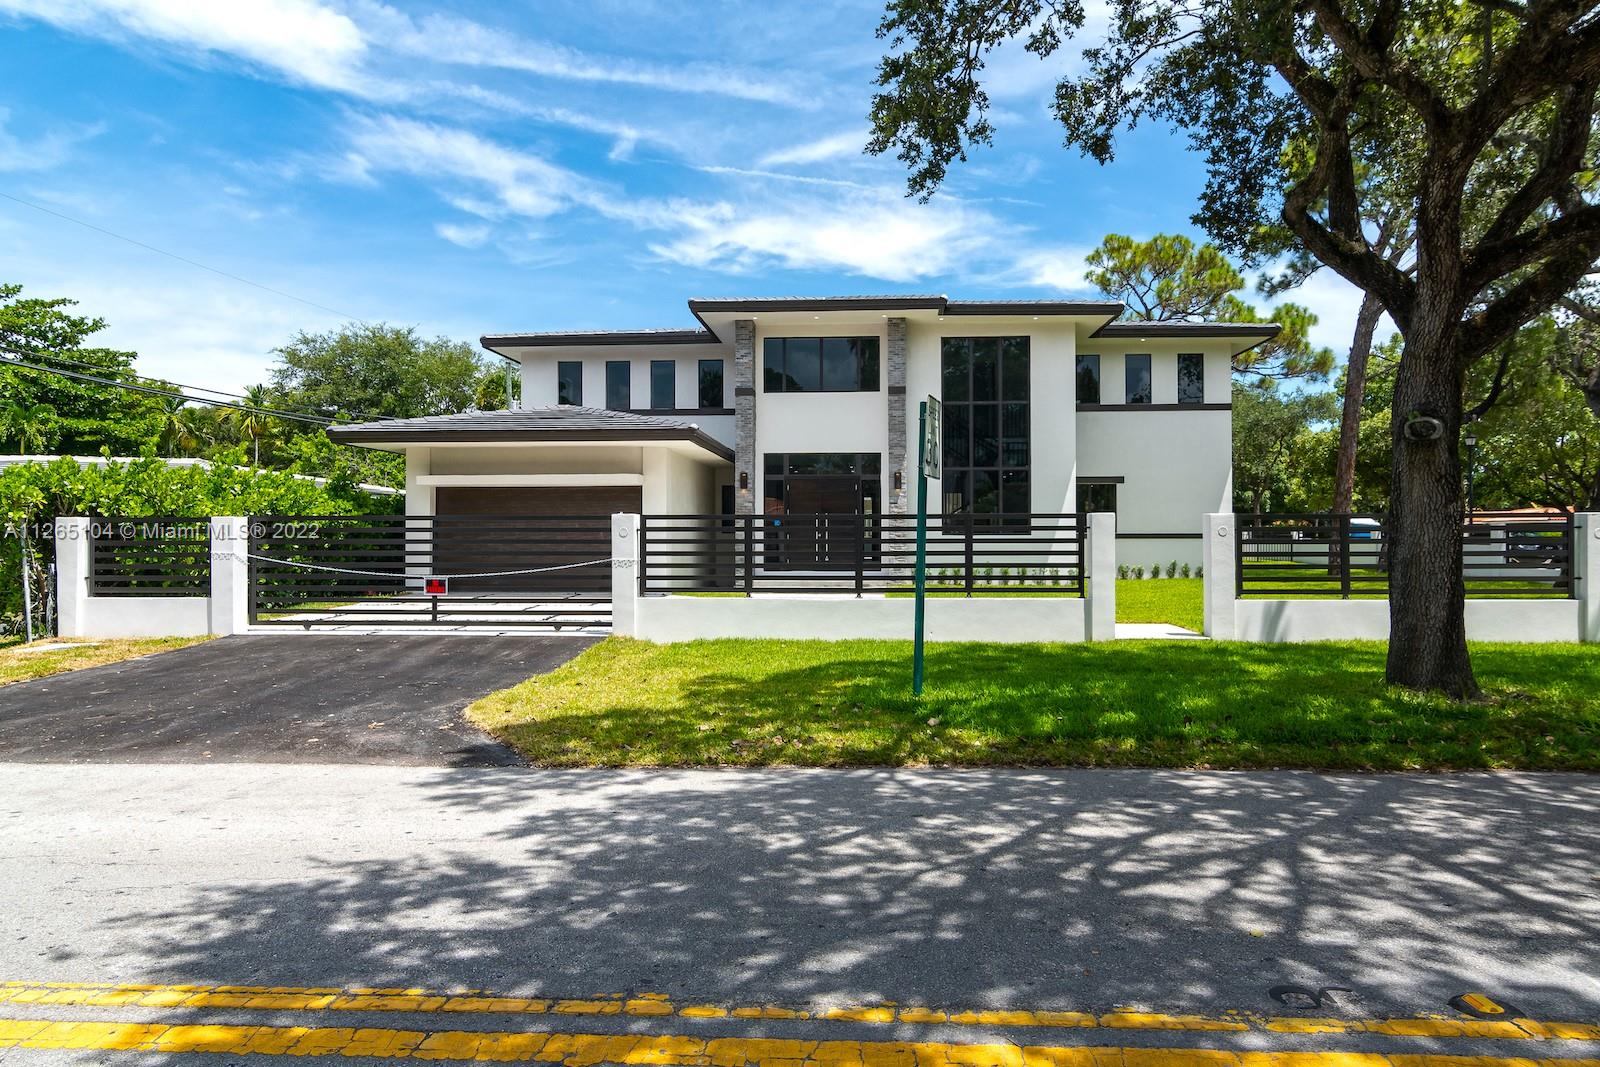 NEW CONSTRUCTION !!! READY!!! Amazing home located in the heart of the City of Coral Gables, minutes away from the Biltmore Hotel. Excellent floor plan ,five bedrooms and five bathrooms, 4445 sf. living area, open kitchen with MONOGRAM appliances, swimming pool, jacuzzi, impact windows and two car garage. First floor encompasses two bedrooms with a Jack and Jill bathroom, an additional guest bathroom with direct access to the backyard. Situated on the second floor is the master bedroom overlooking the pool and two additional suites.